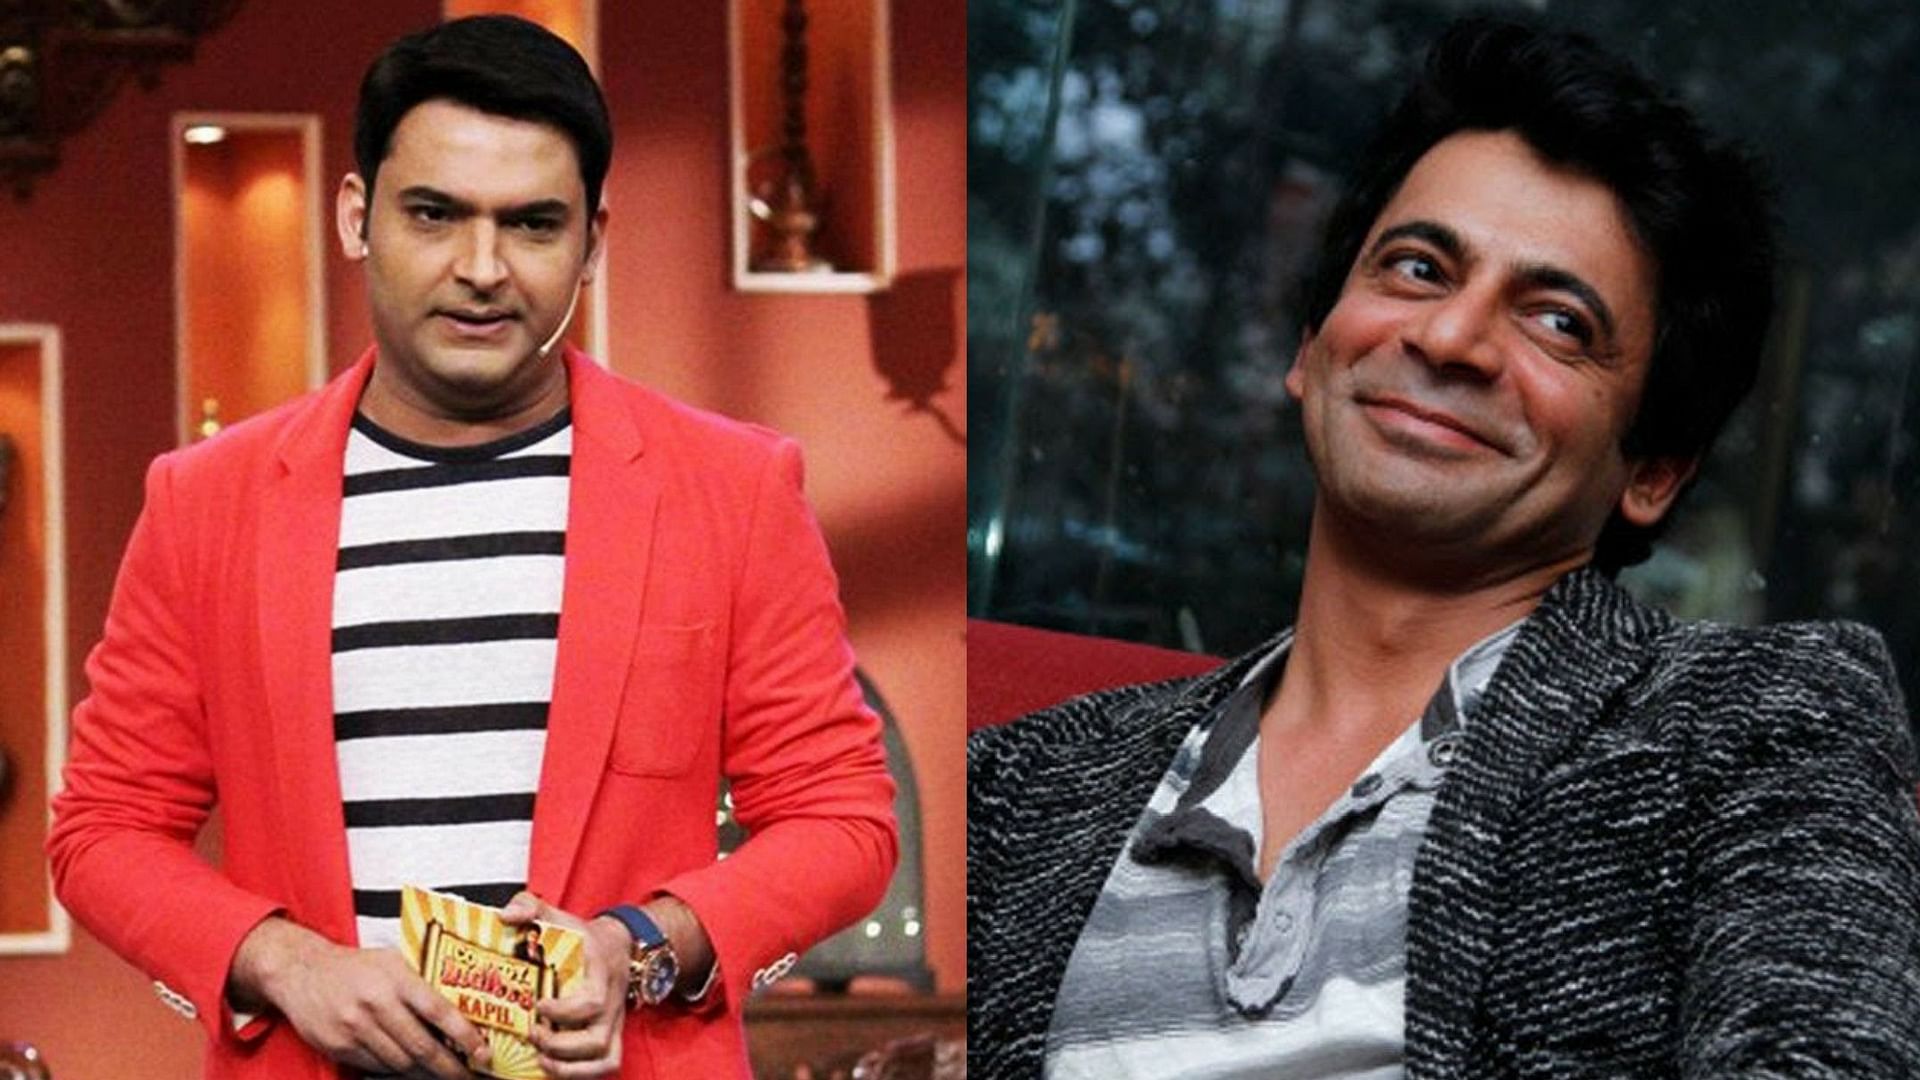 Here’s what happened between Kapil Sharma and Sunil Grover according to a fellow passenger on the same flight. (Photo courtesy: SONY TV)